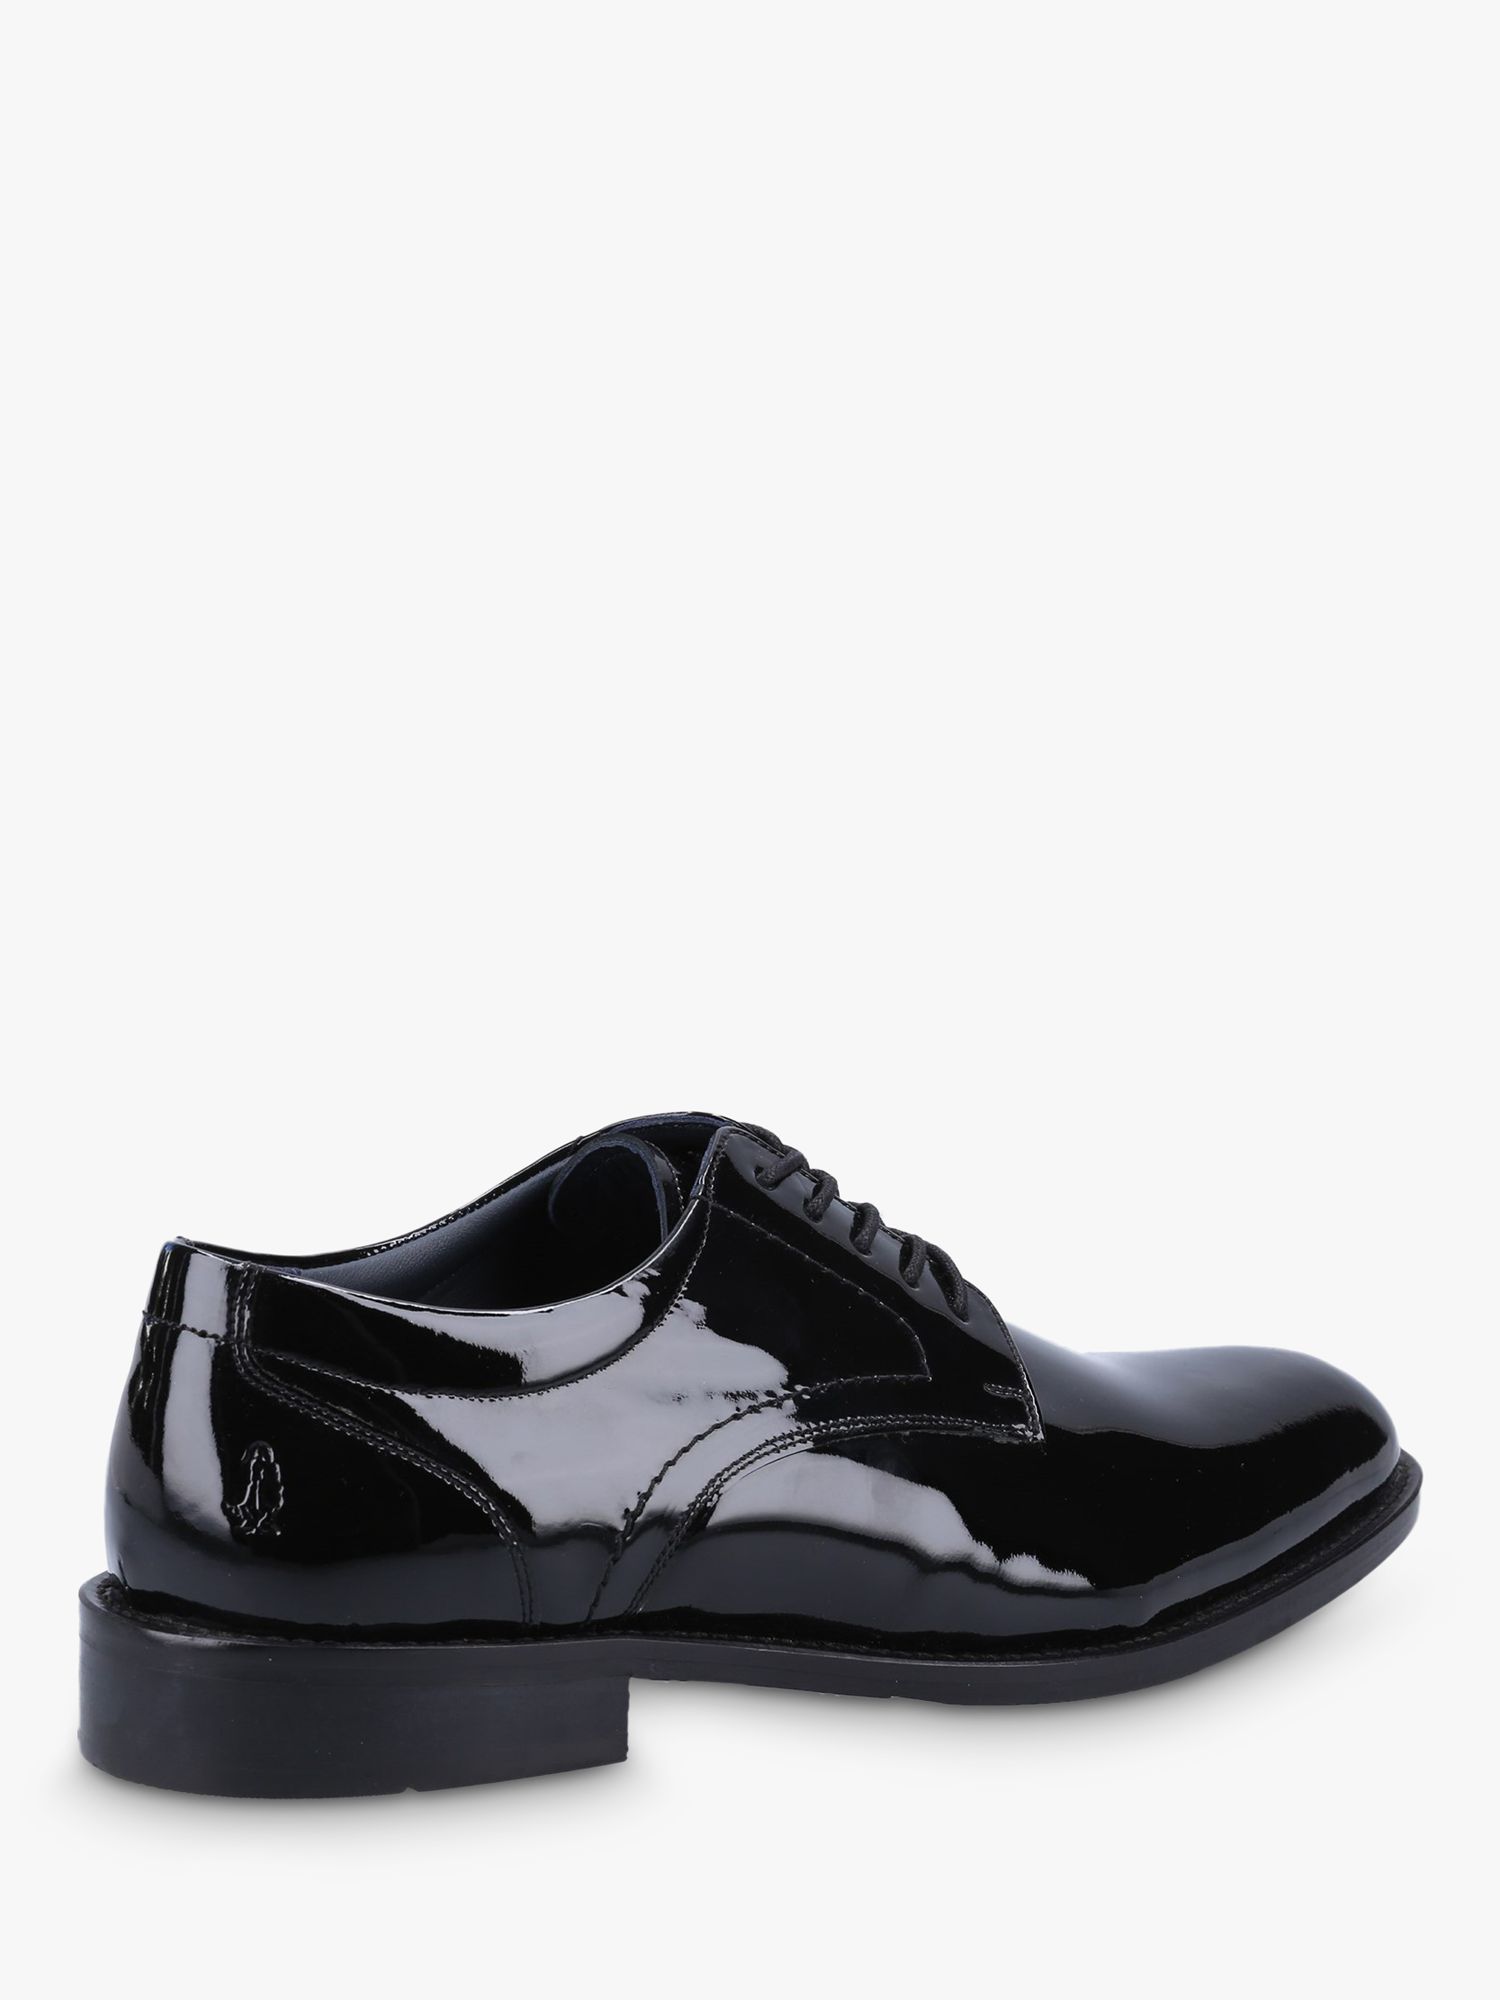 Hush Puppies Damien Patent Leather Lace Up Brogues, Black, 6